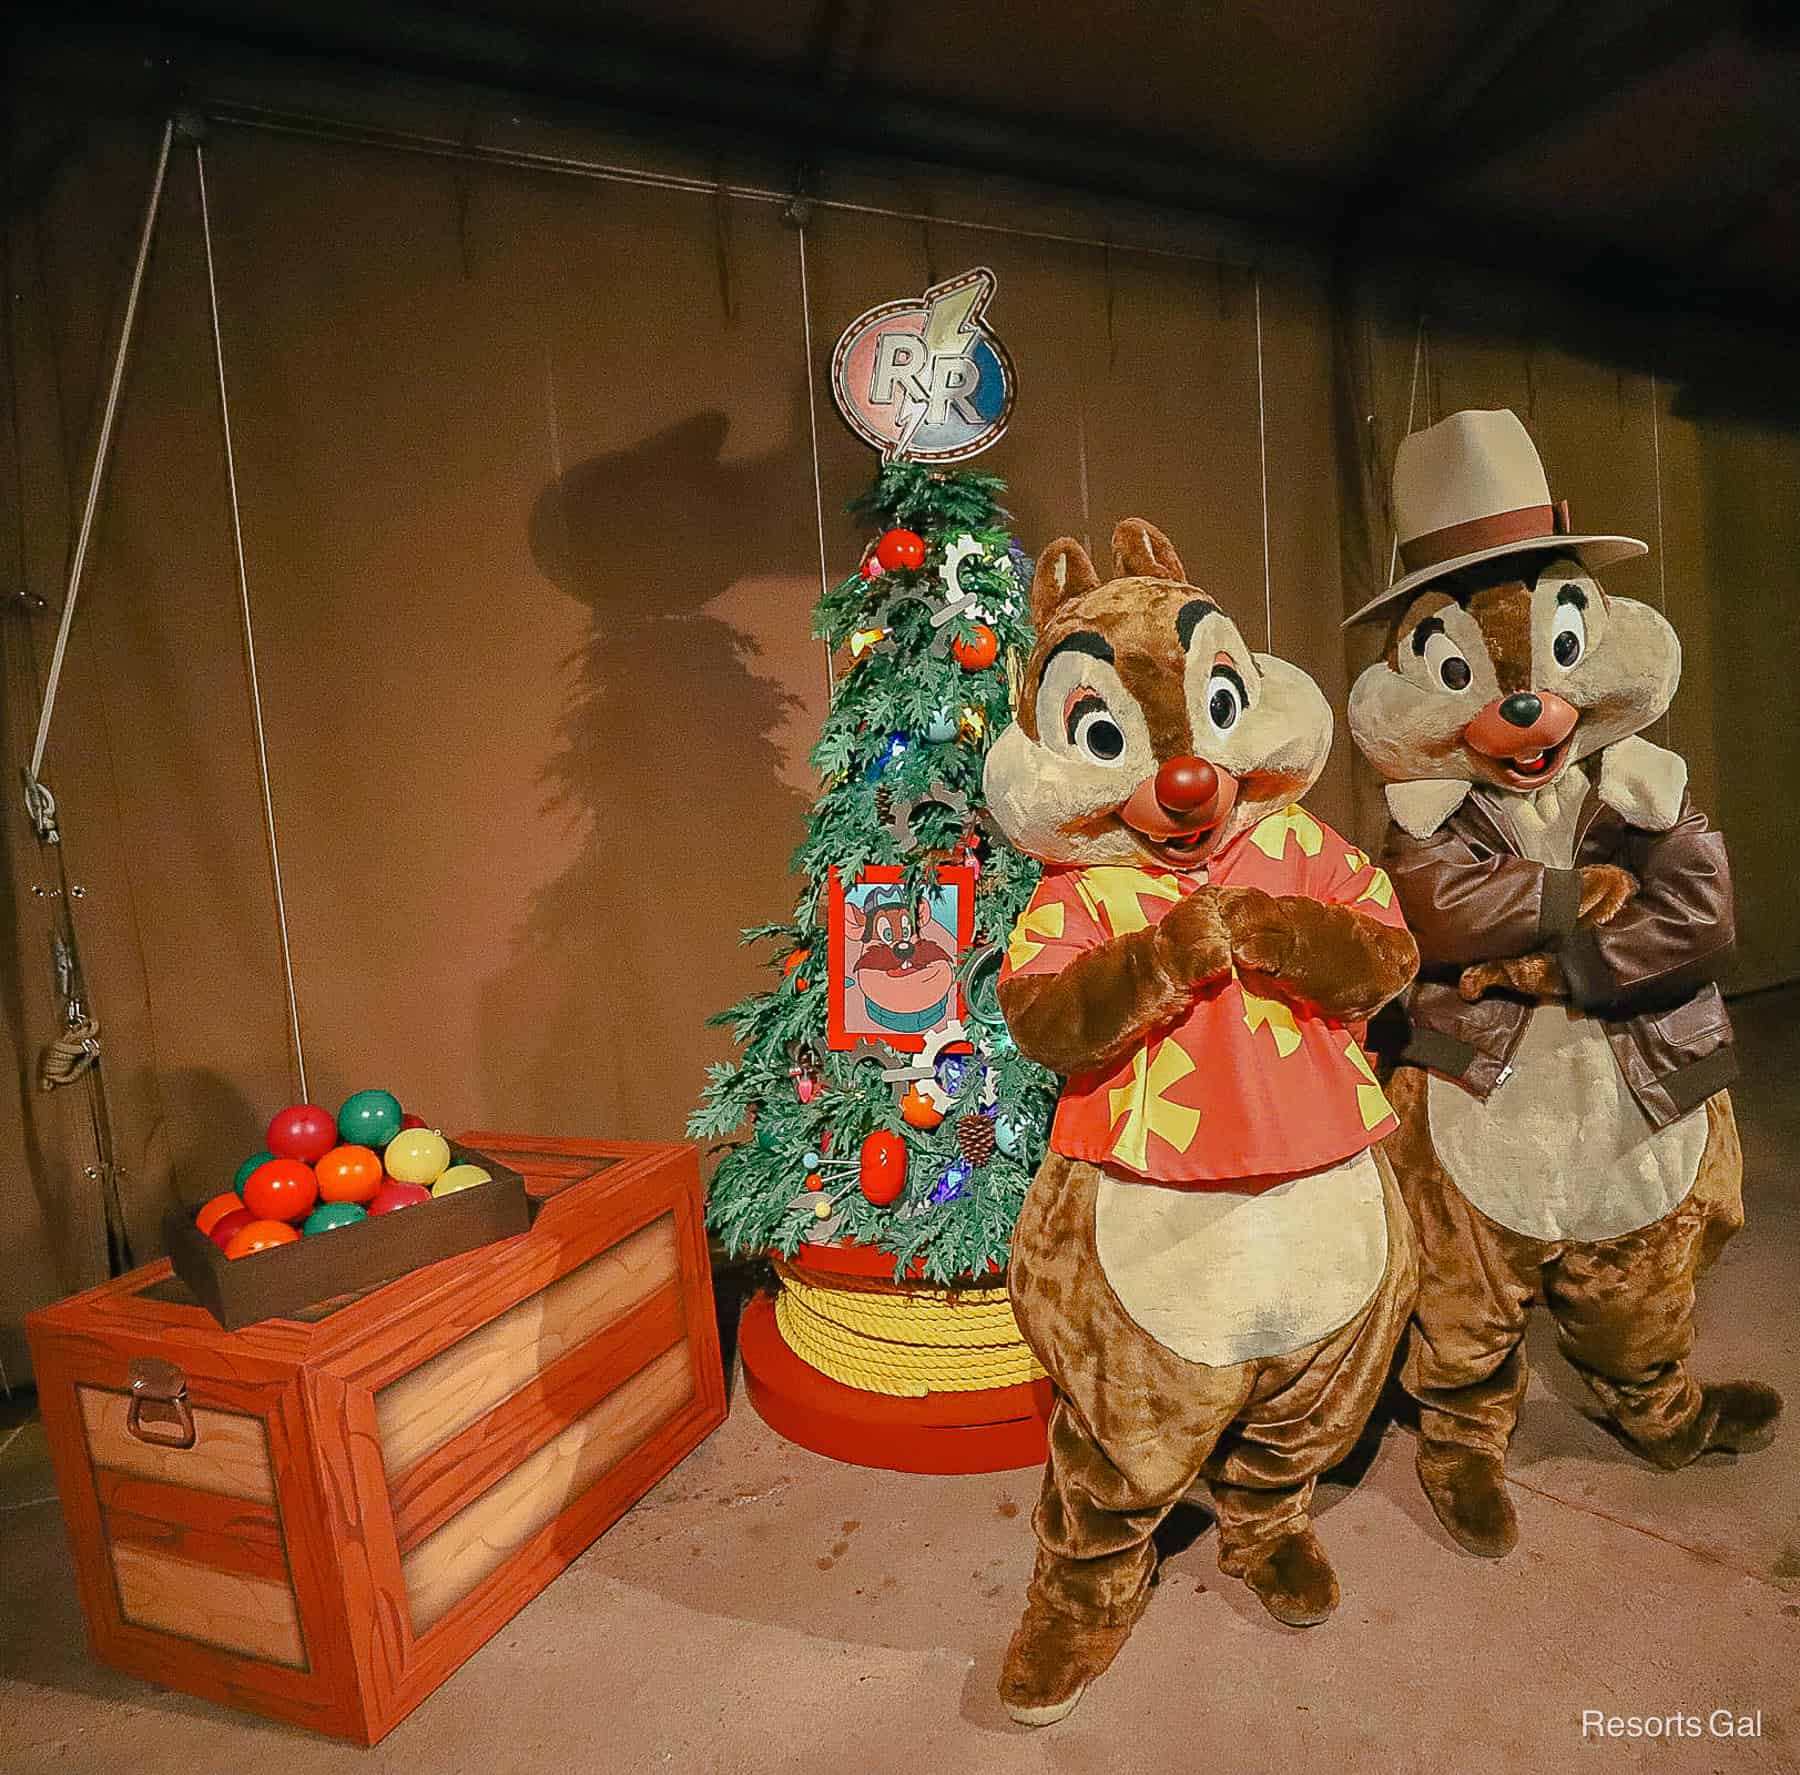 Chip and Dale as Rescue Rangers with a Christmas tree setup 